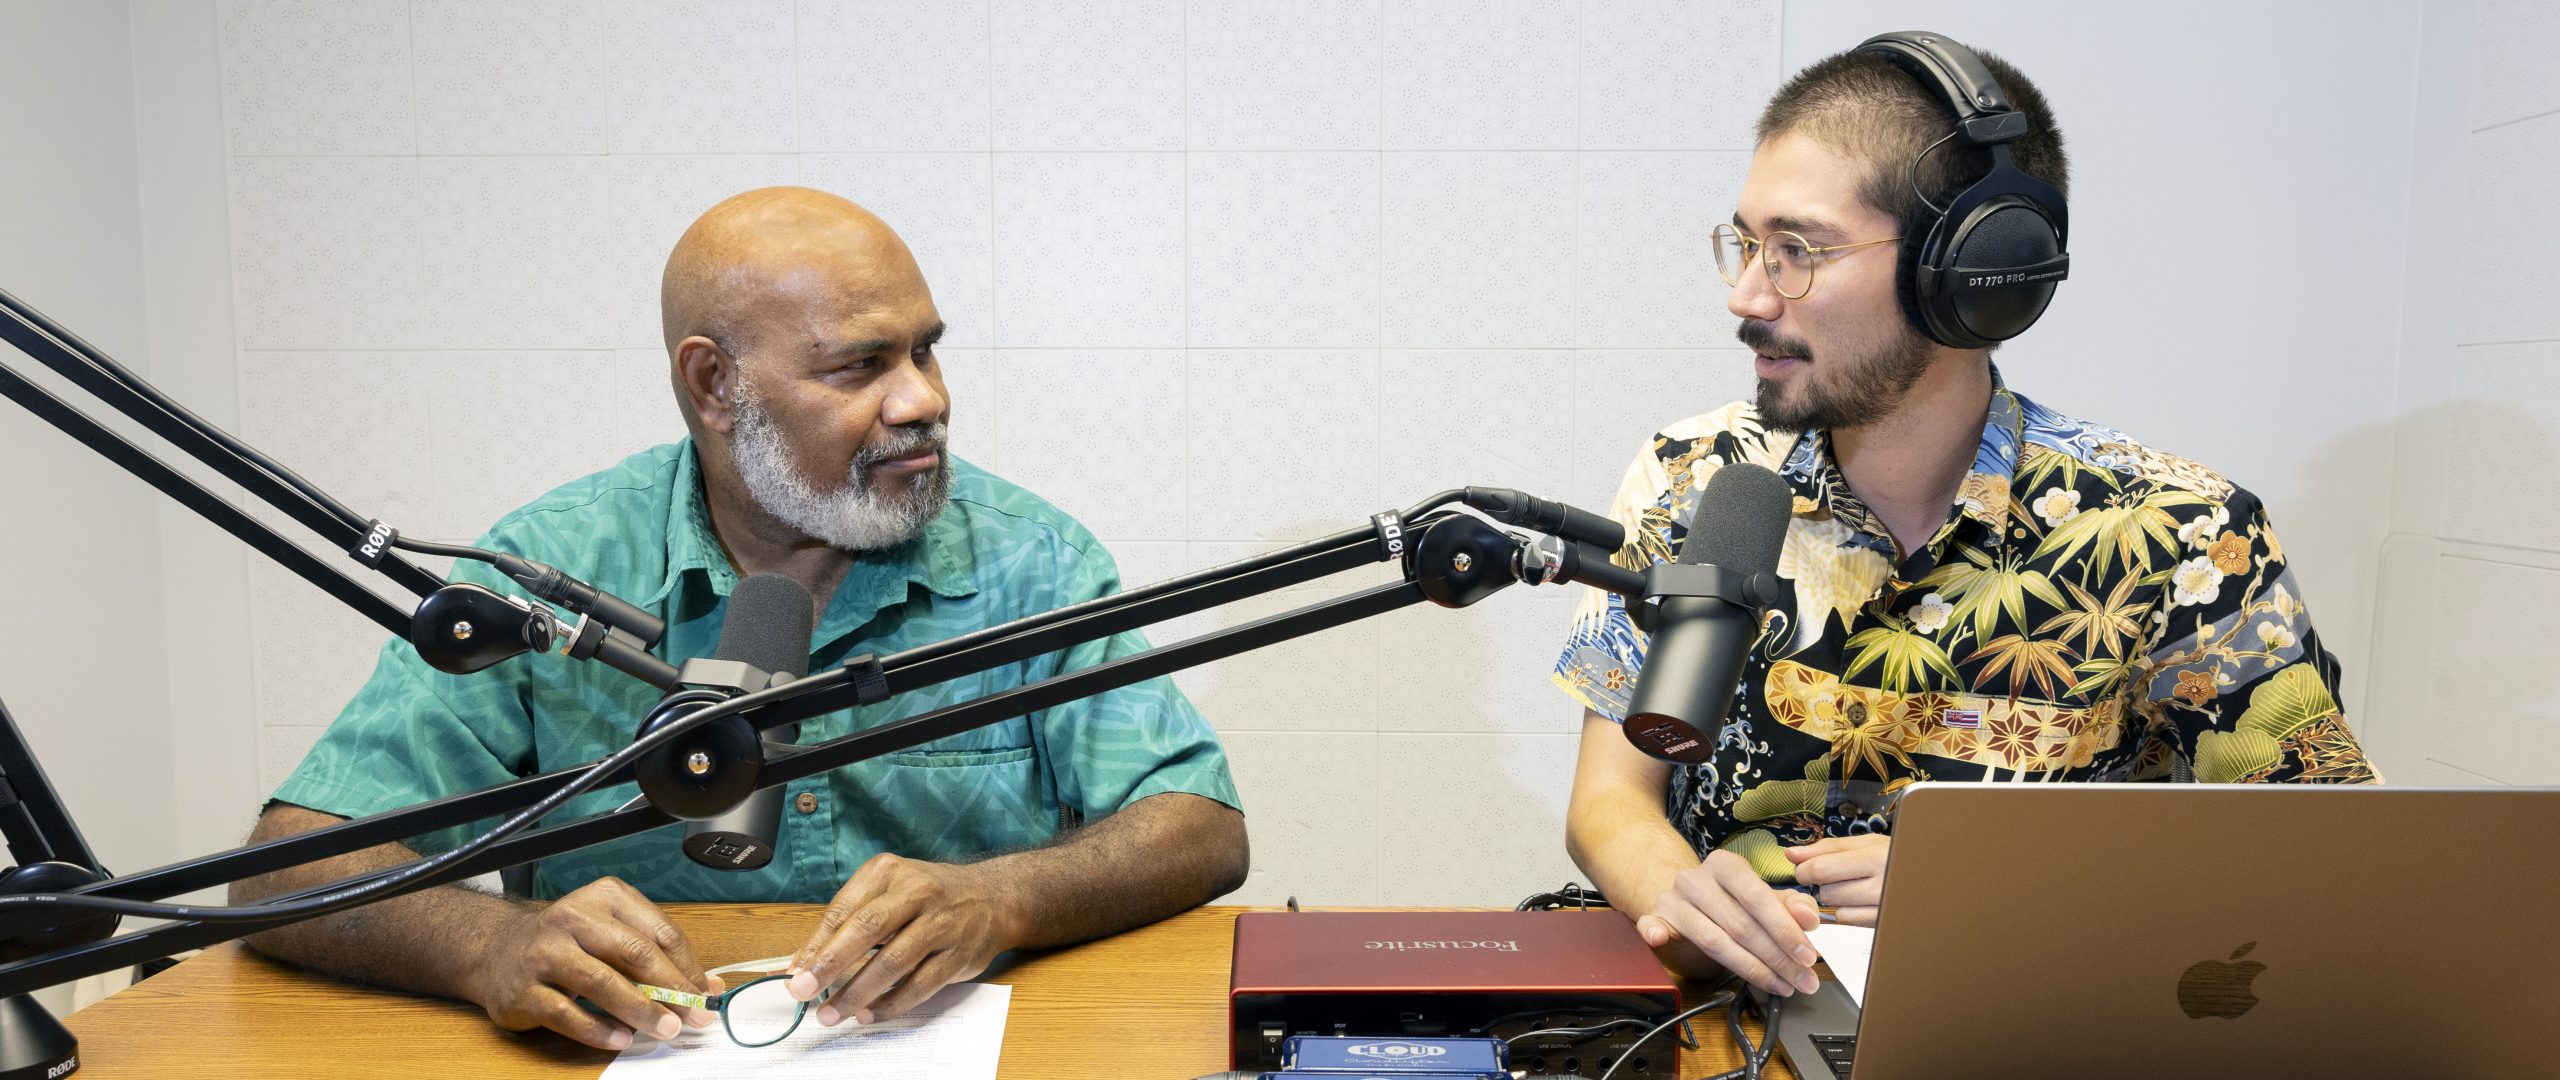 Recording "Oceania Currents", a podcast by the Center for Pacific Islands Studies